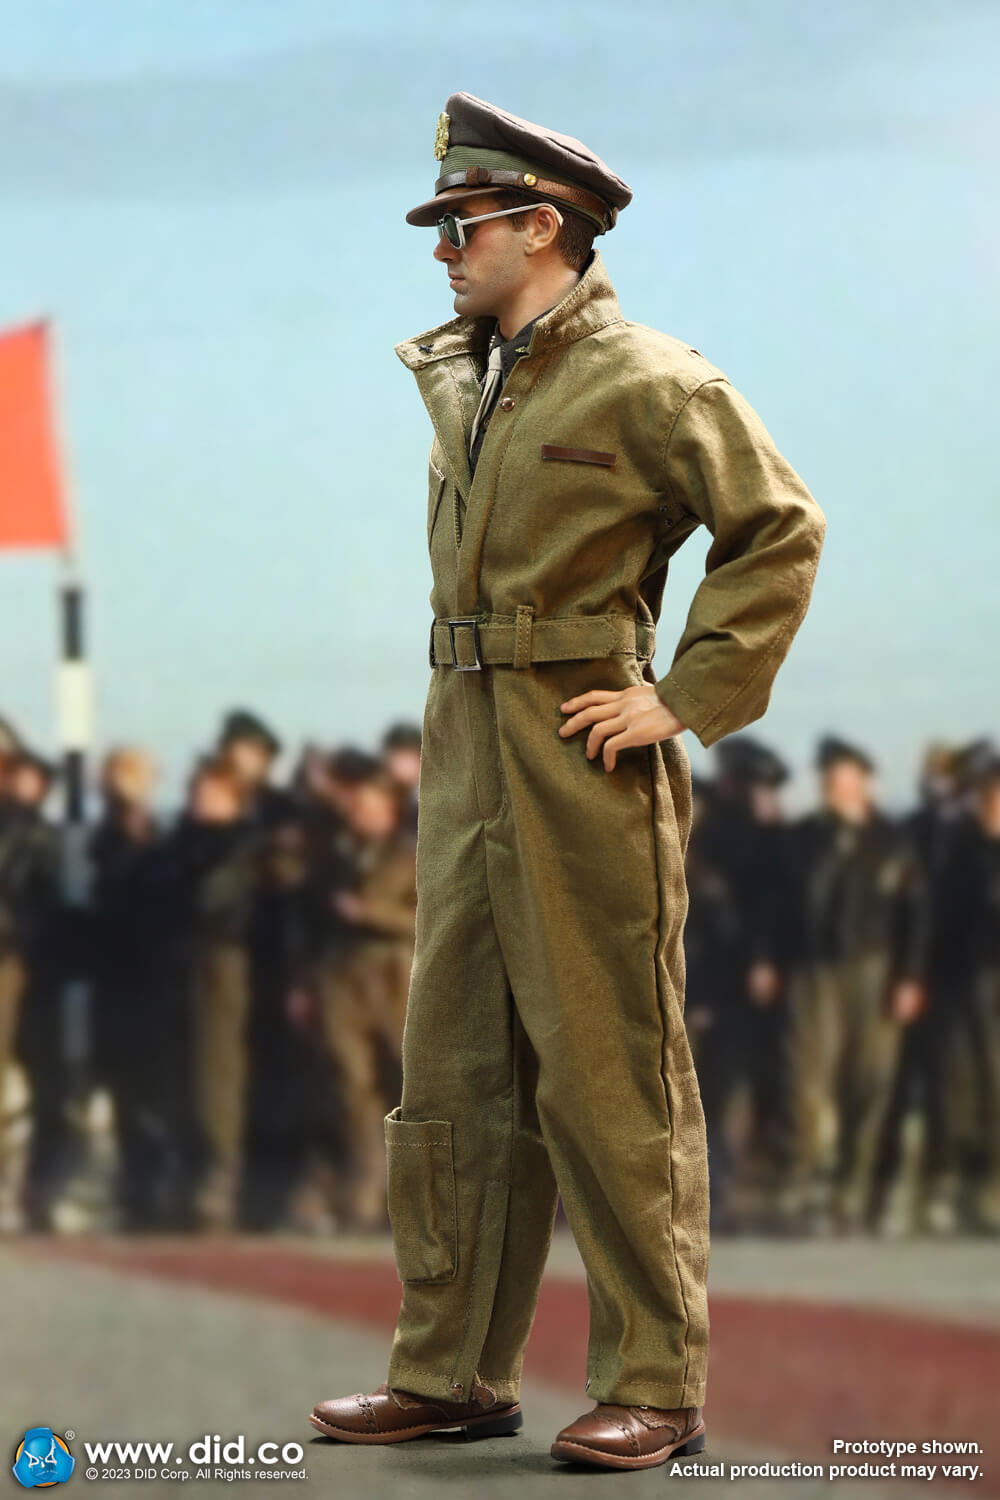 NEW PRODUCT: DiD: A80167 WWII United States Army Air Forces Pilot – Captain Rafe 3518